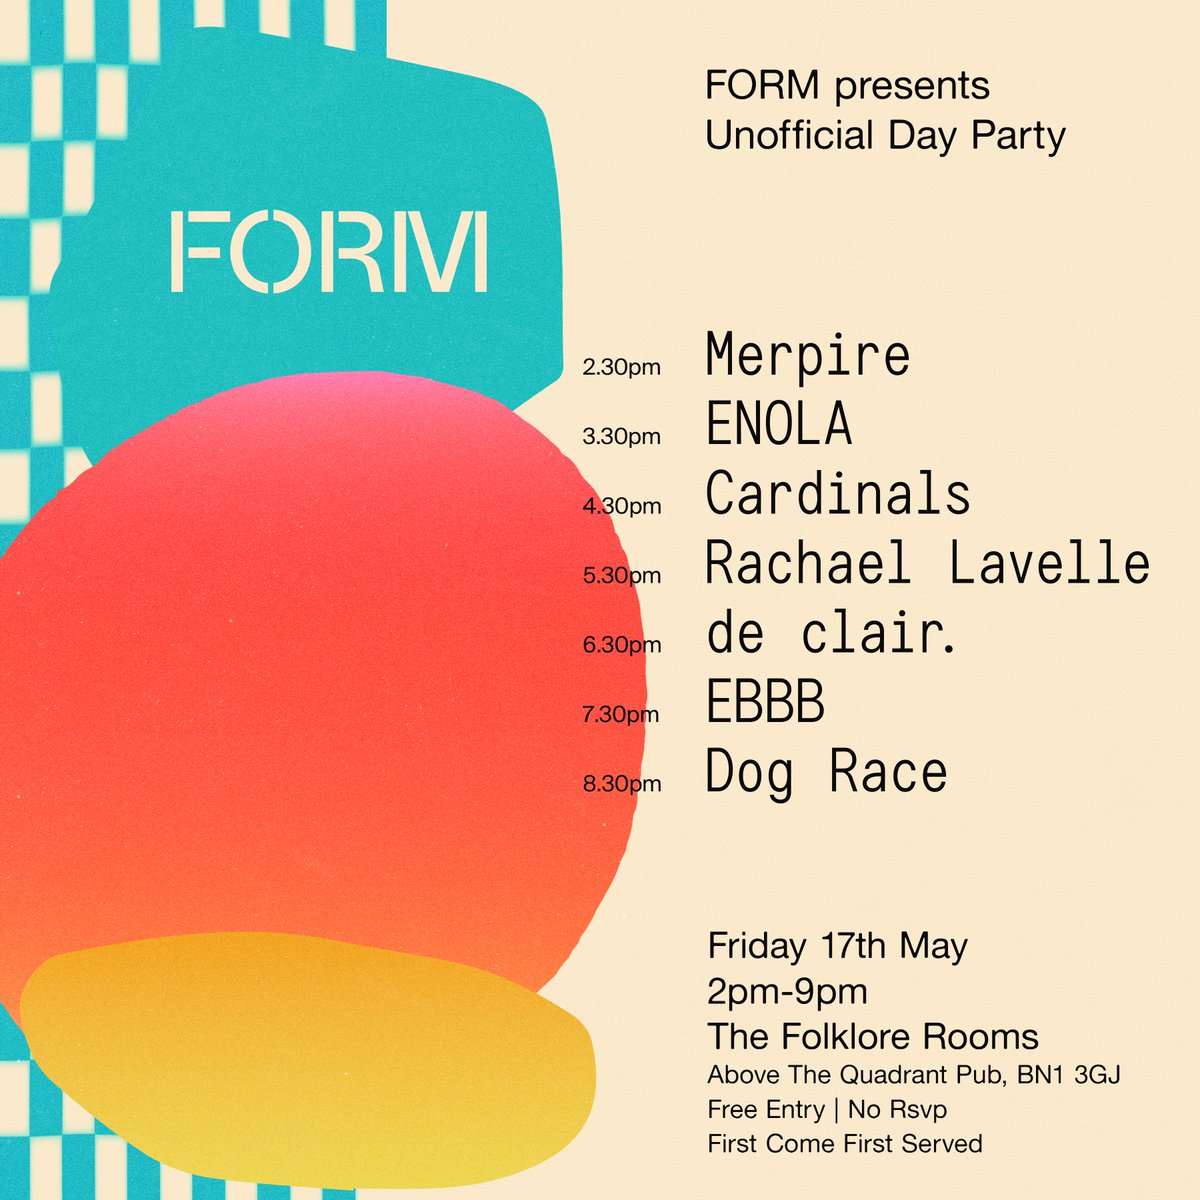 Thrilled to announce our unofficial day party at @folklorerooms, Brighton this Friday 17th May! Featuring 7 of the artists we’re most excited about this year: Merpire / @enolaenolamusic / @bandcardinals / @rachael_lavelle / de clair / @EBBband / @dograceband FREE ENTRY (no